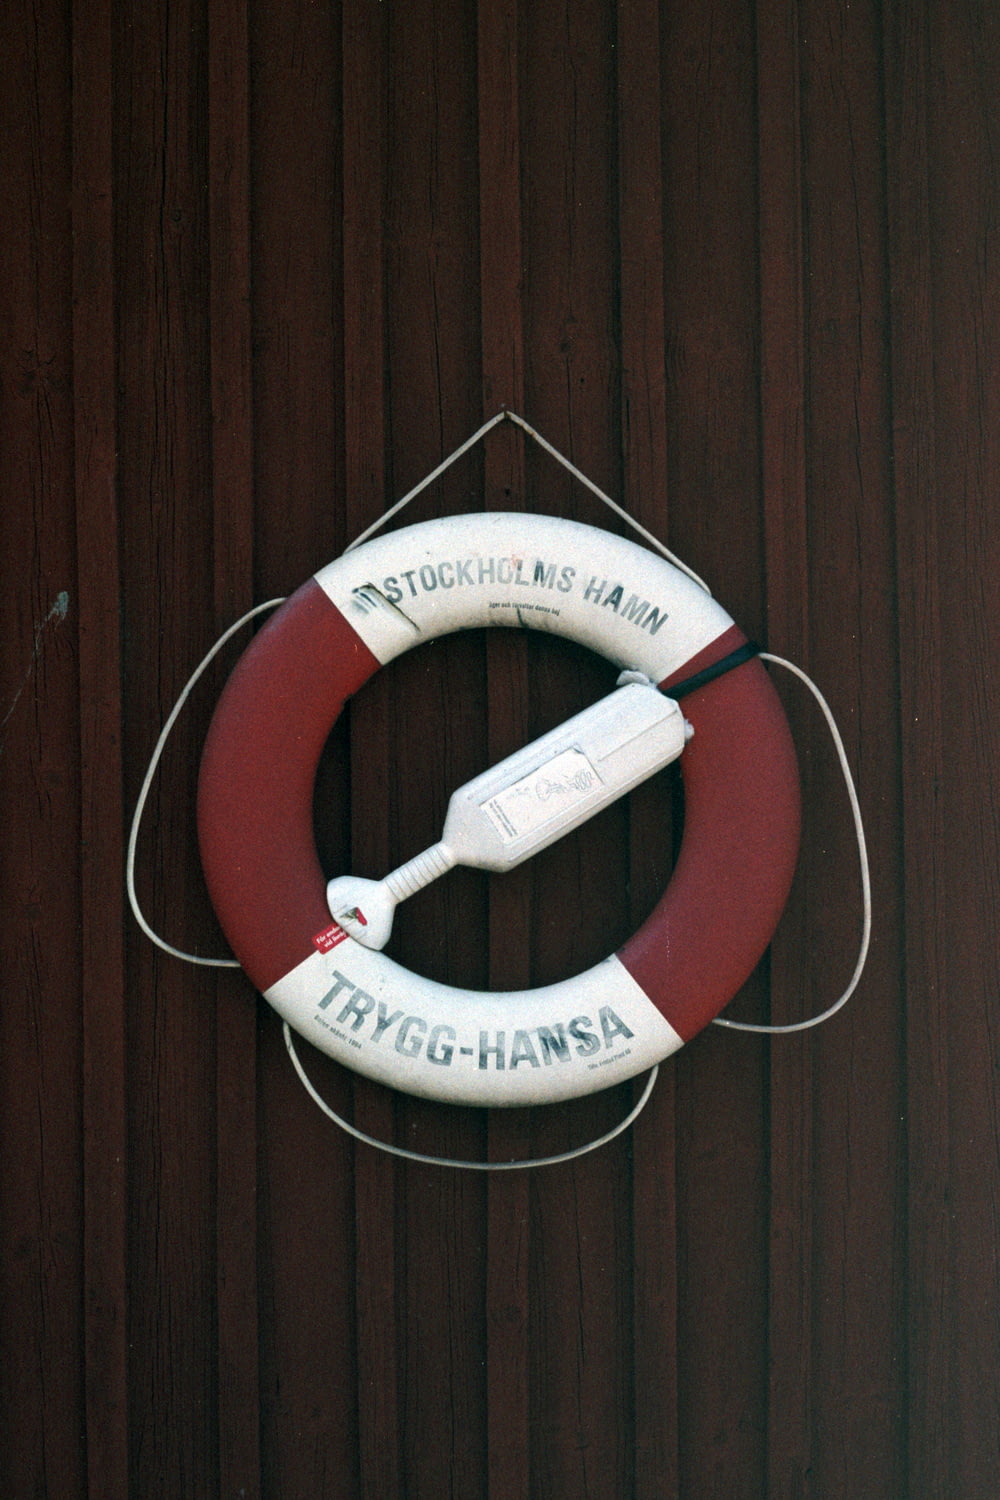 a life preserver hanging on a wooden wall